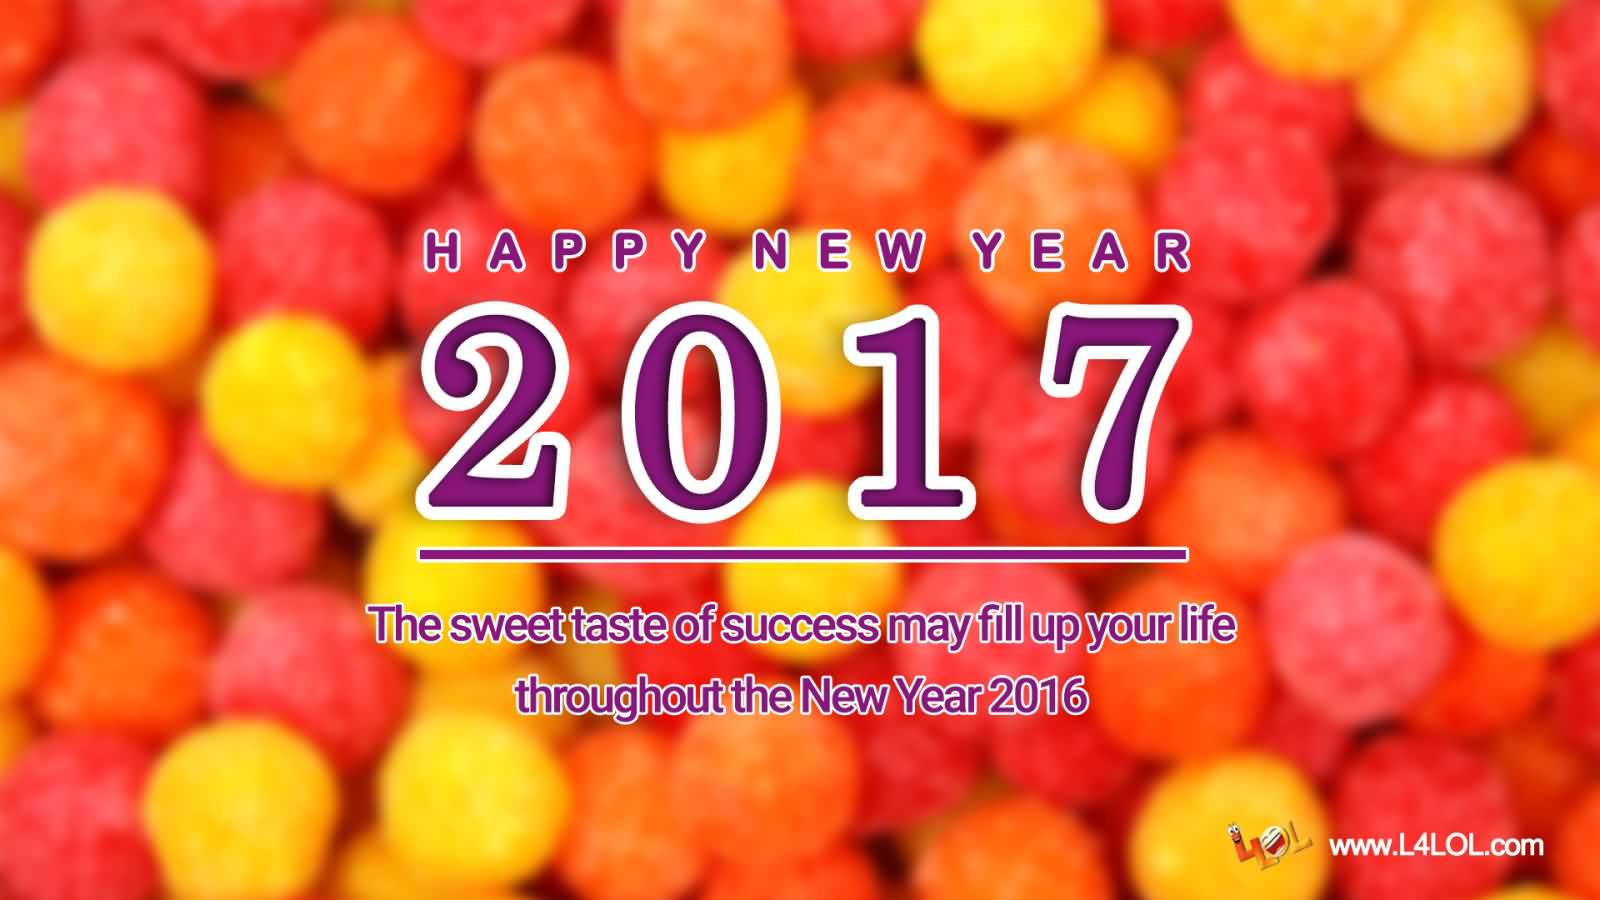 Happy New Year 2017 The Sweet Taste Success May Fill Up Your Life Throughout The